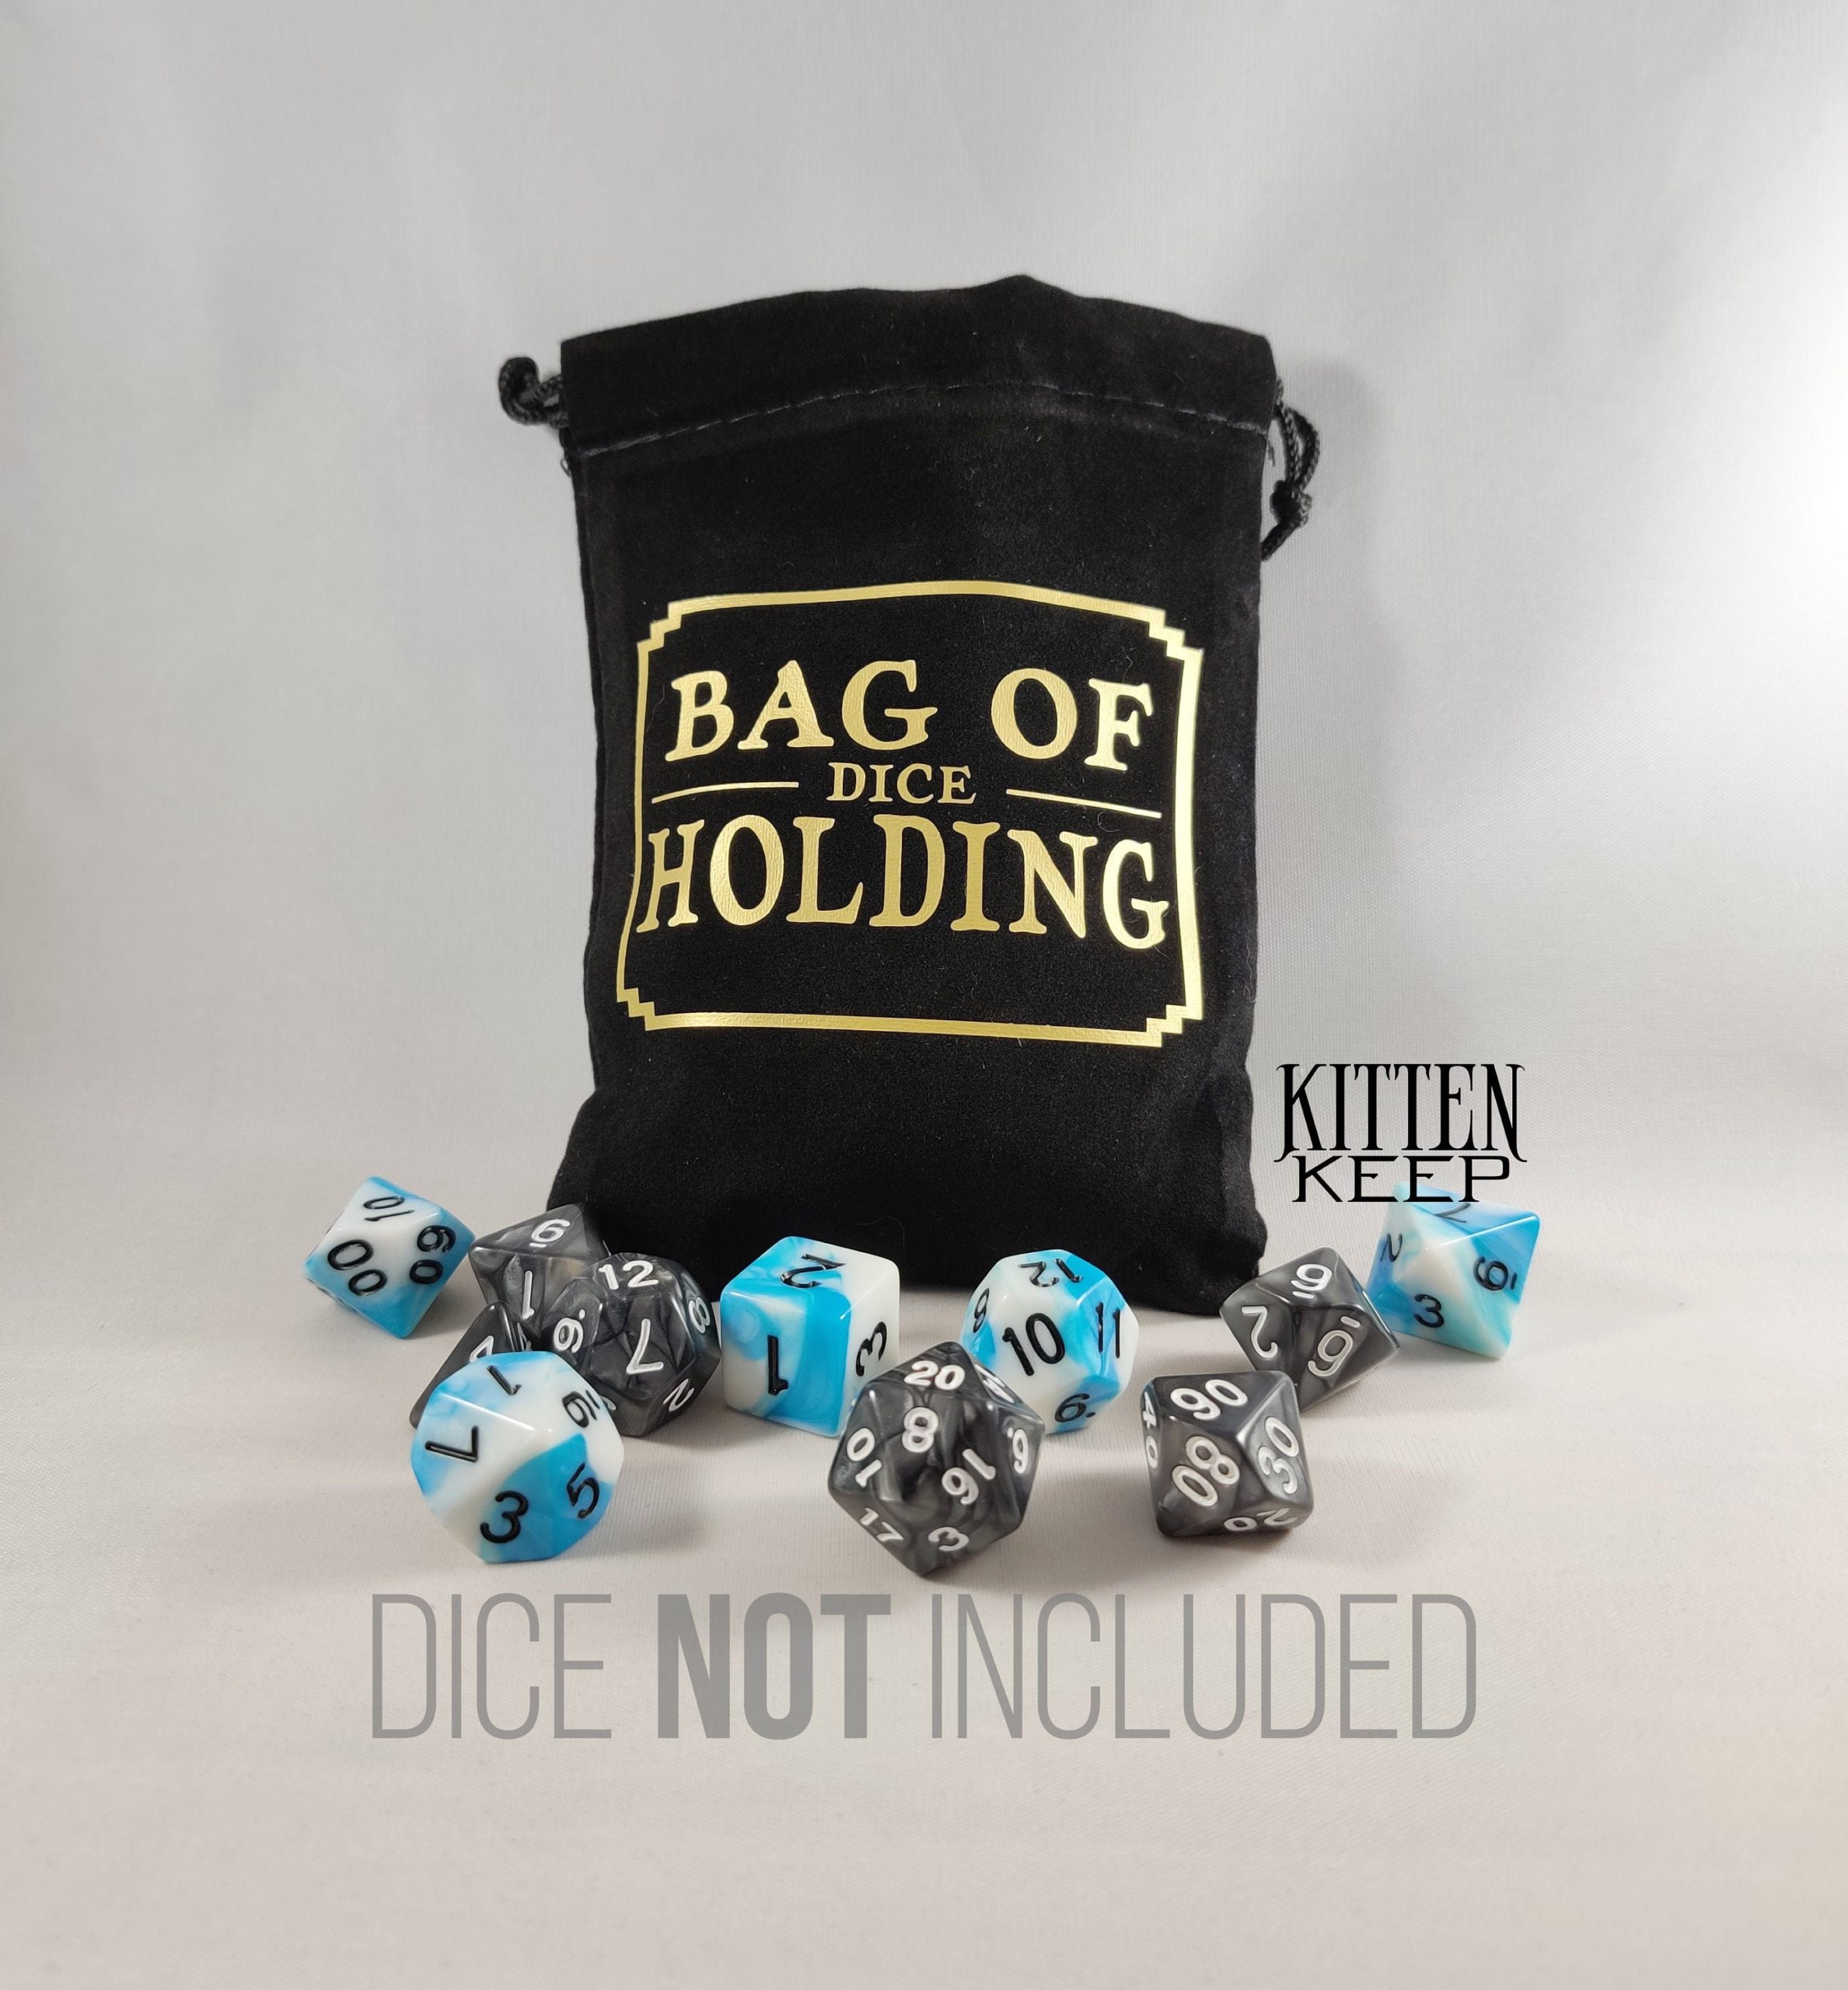 Bag of (Dice) Holding Dice Bag